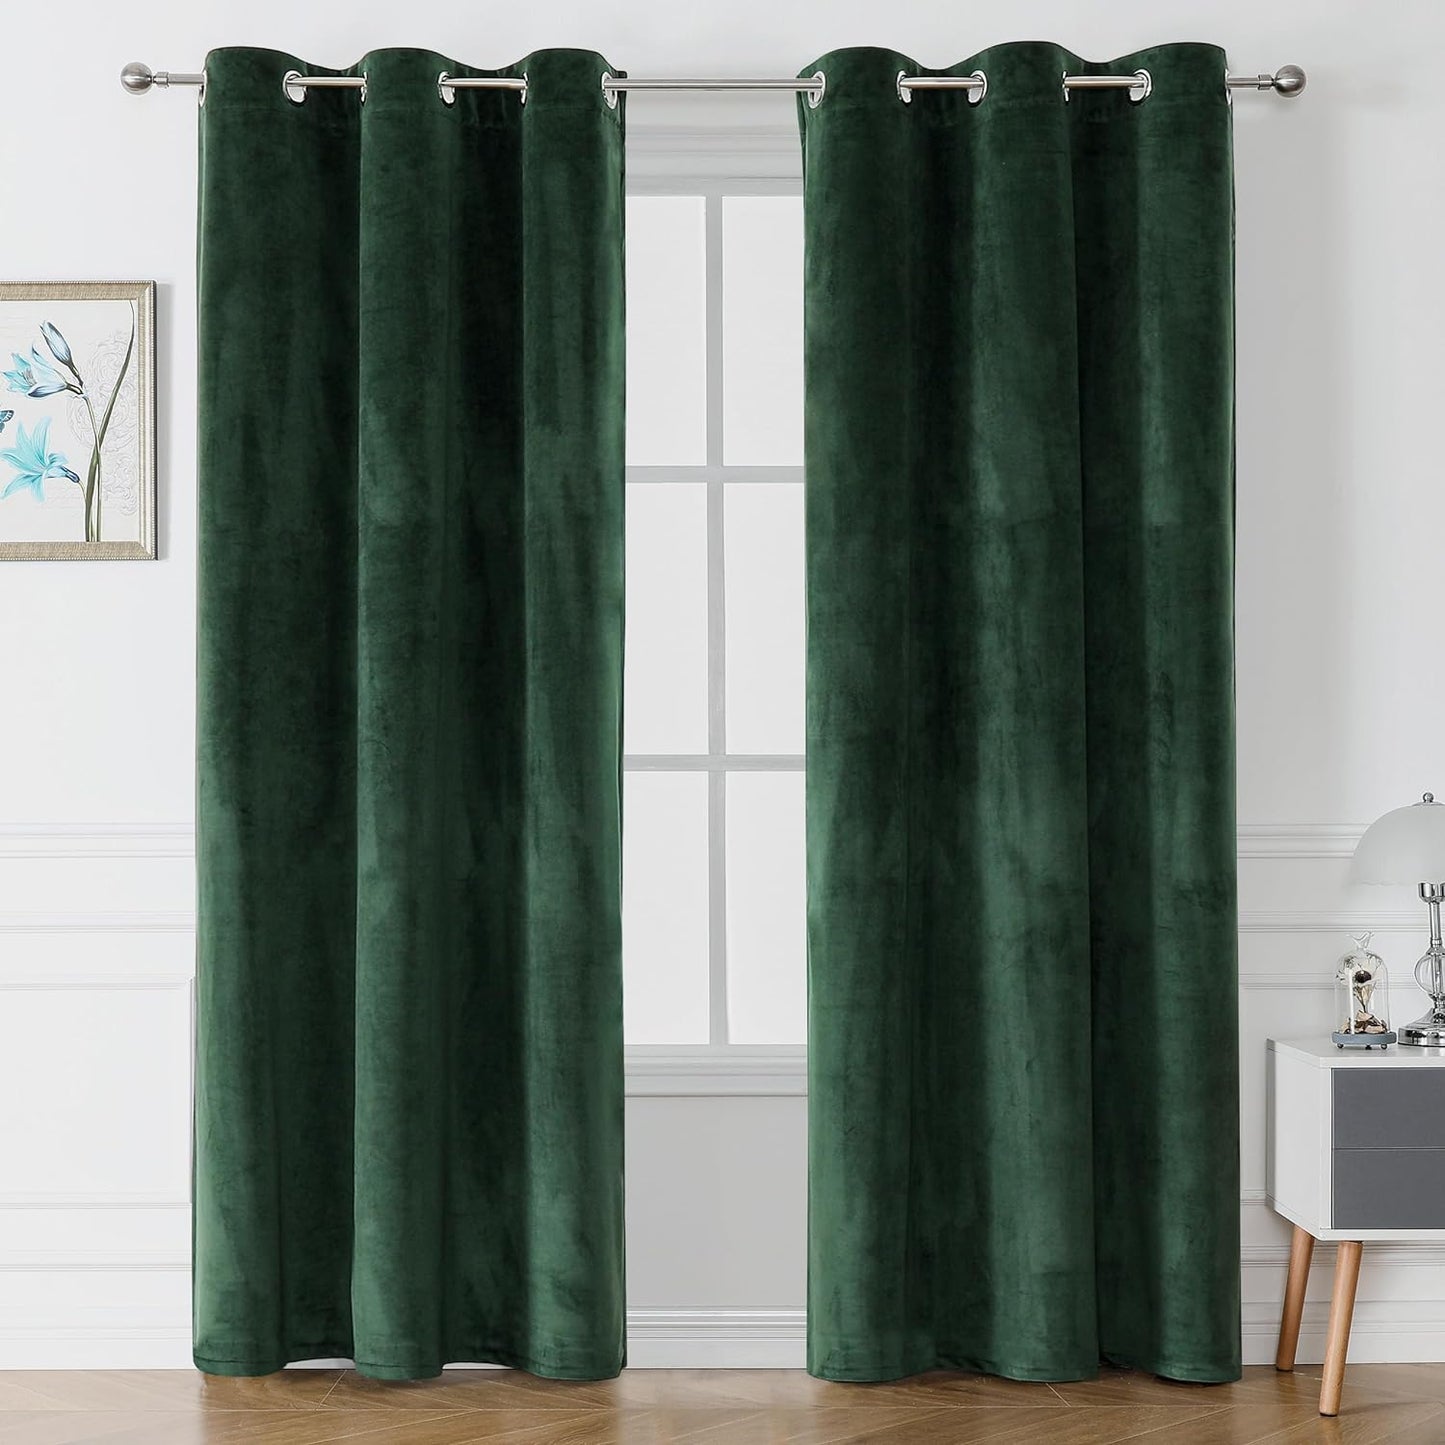 Victree Velvet Curtains for Bedroom, Blackout Curtains 52 X 84 Inch Length - Room Darkening Sun Light Blocking Grommet Window Drapes for Living Room, 2 Panels, Navy  Victree Dark Green 42 X 72 Inches 